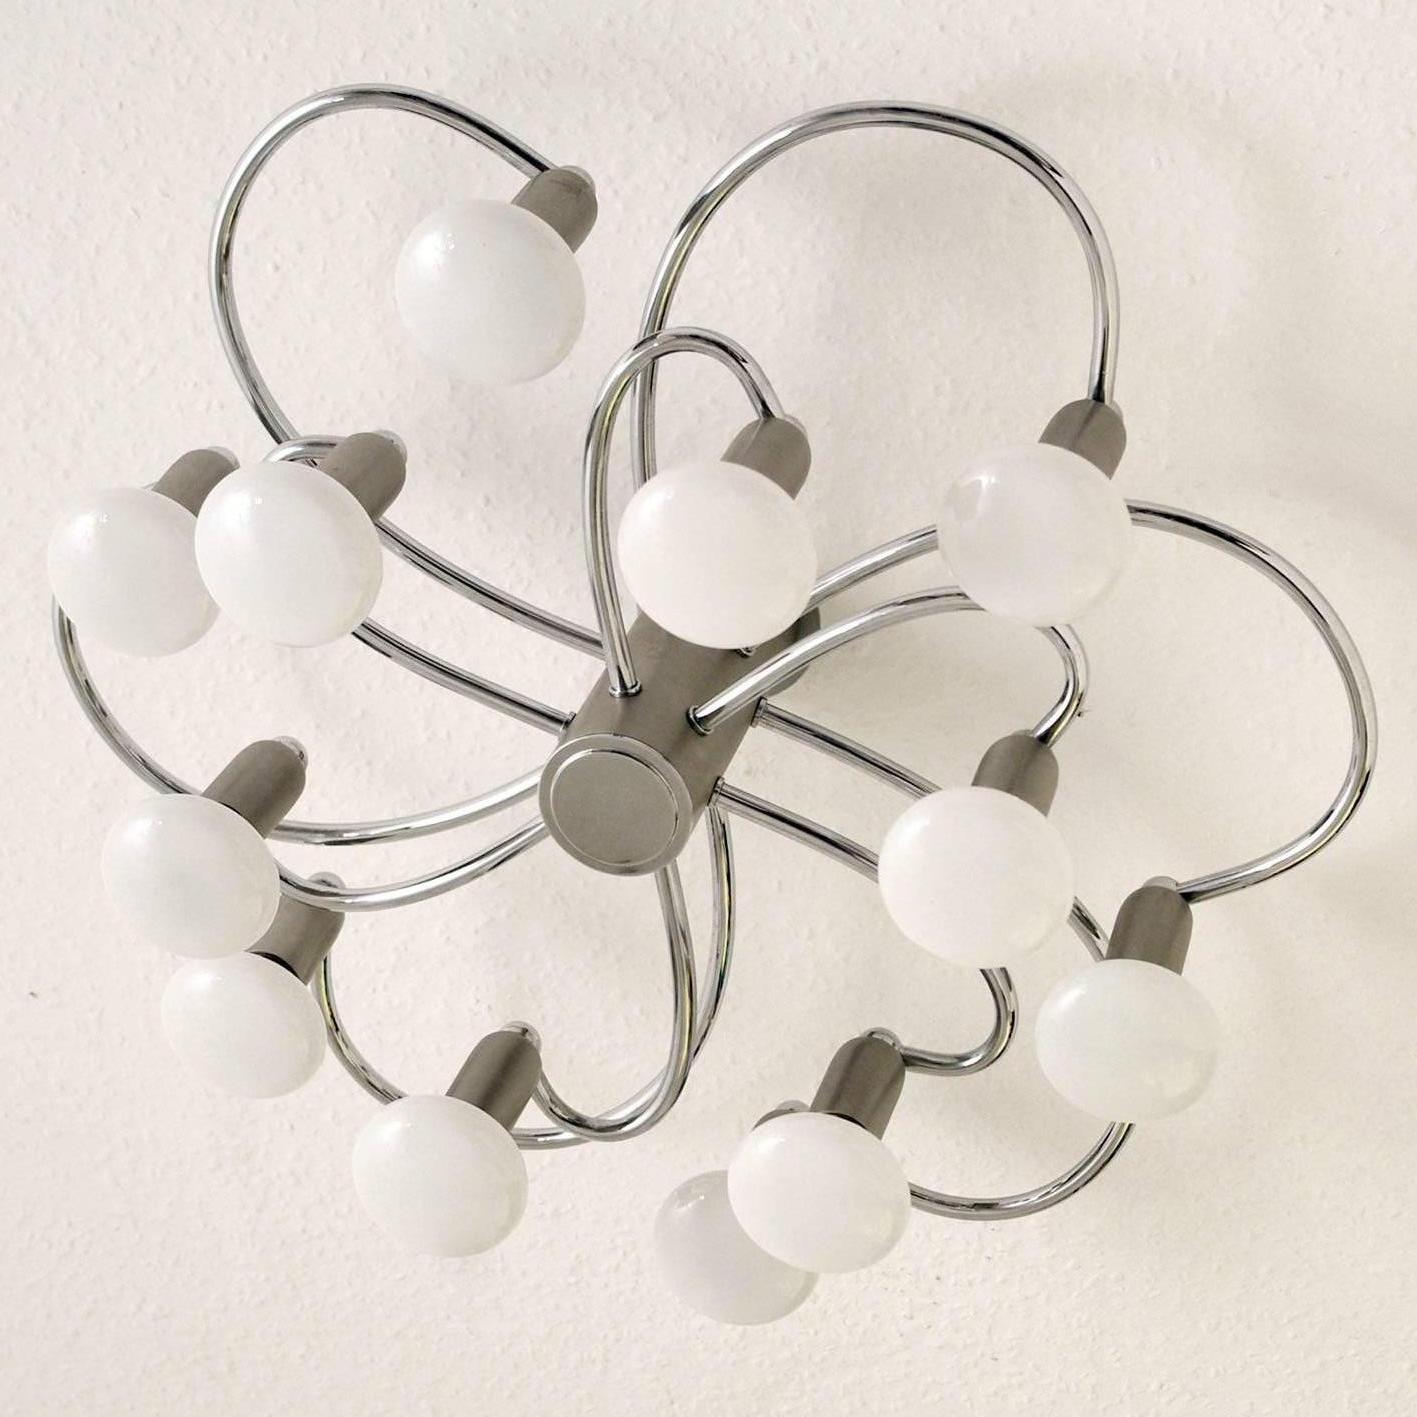 Beautiful sculptural Sciolari / Leola style ceiling or wall flush mount by Helestra,
Germany, 1970s.
Shipping without bulbs.